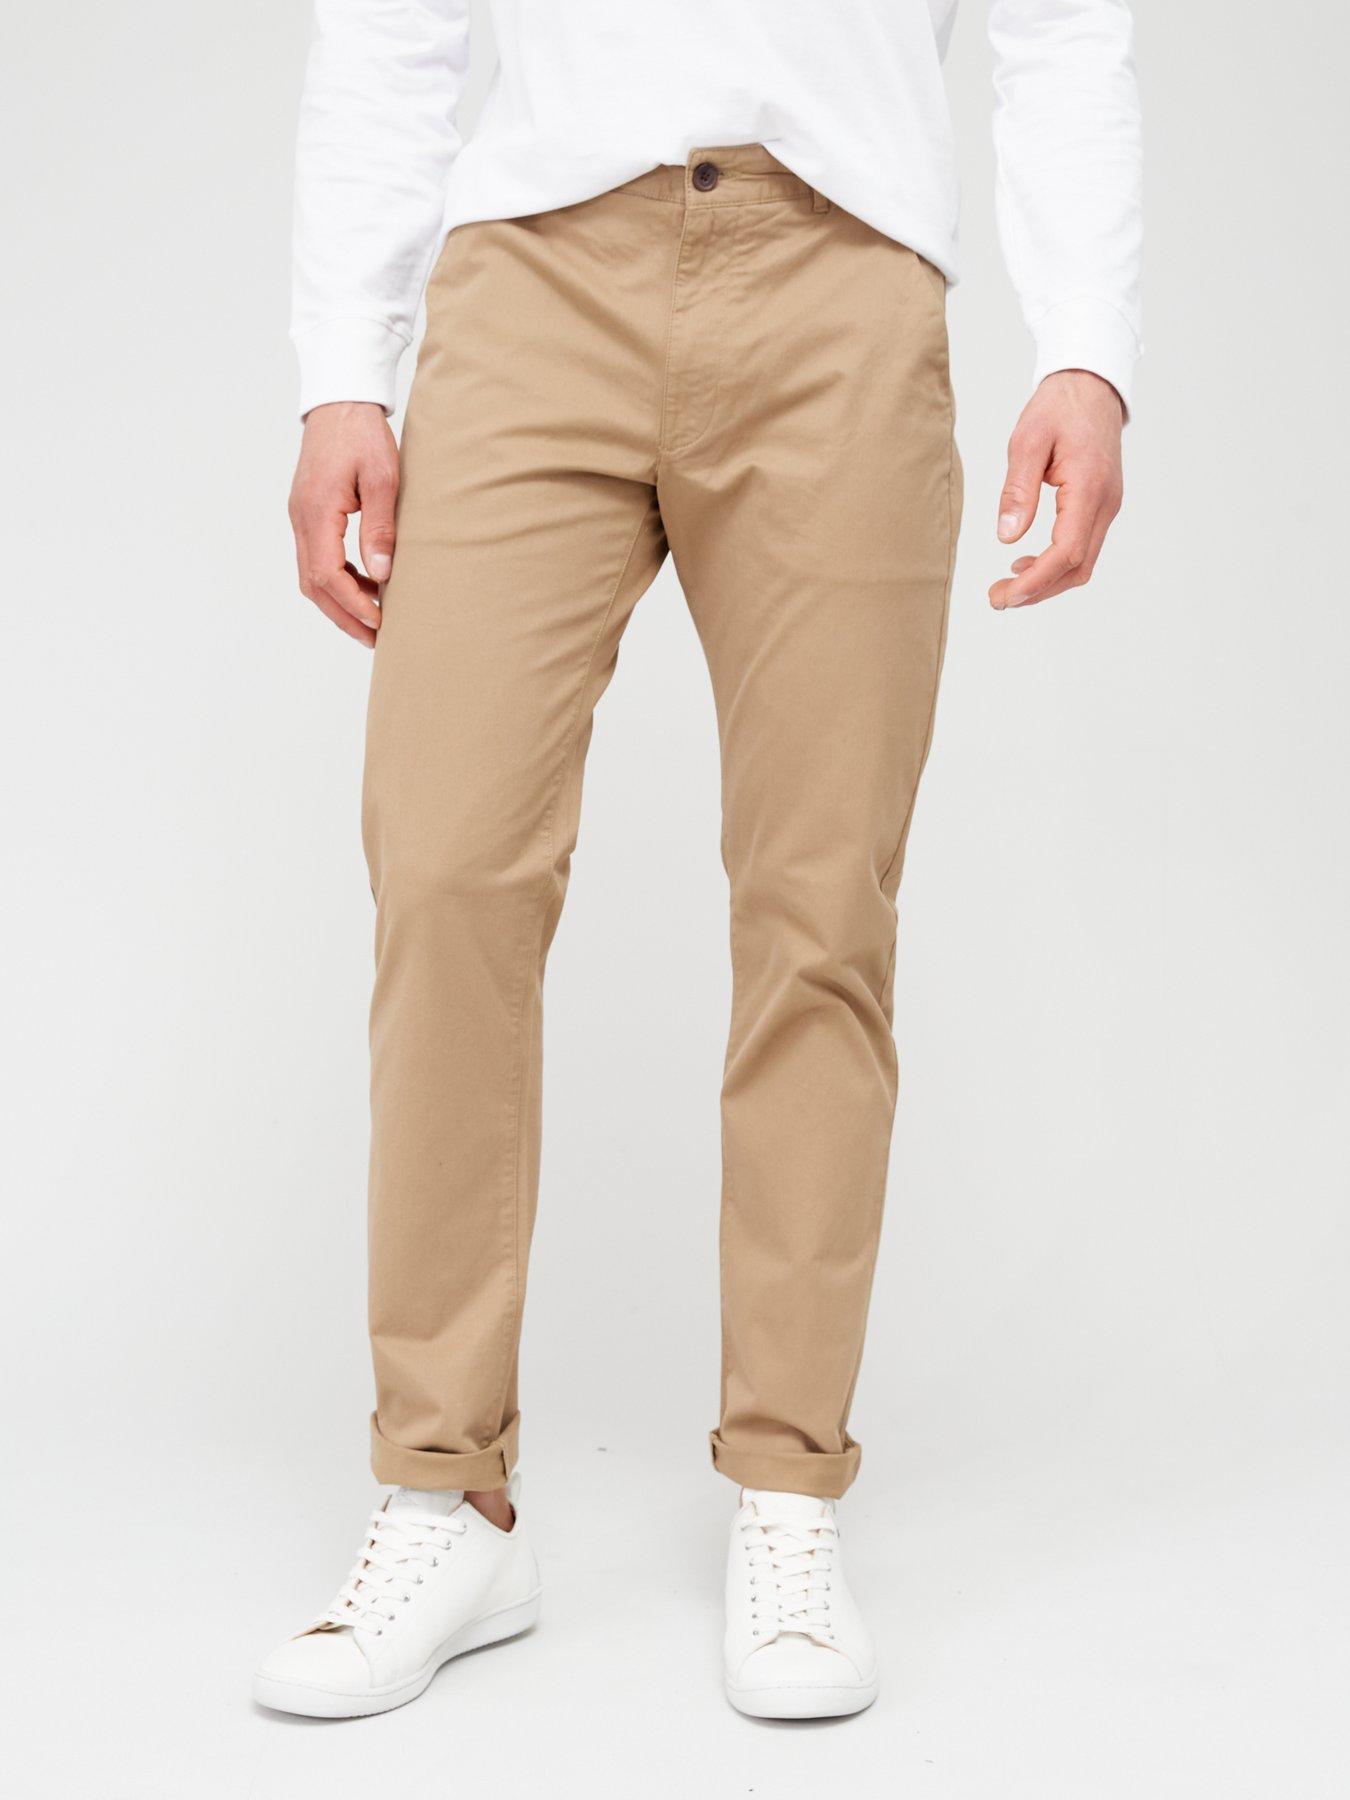 Levi's XX Chino Jogger Trousers - Beige